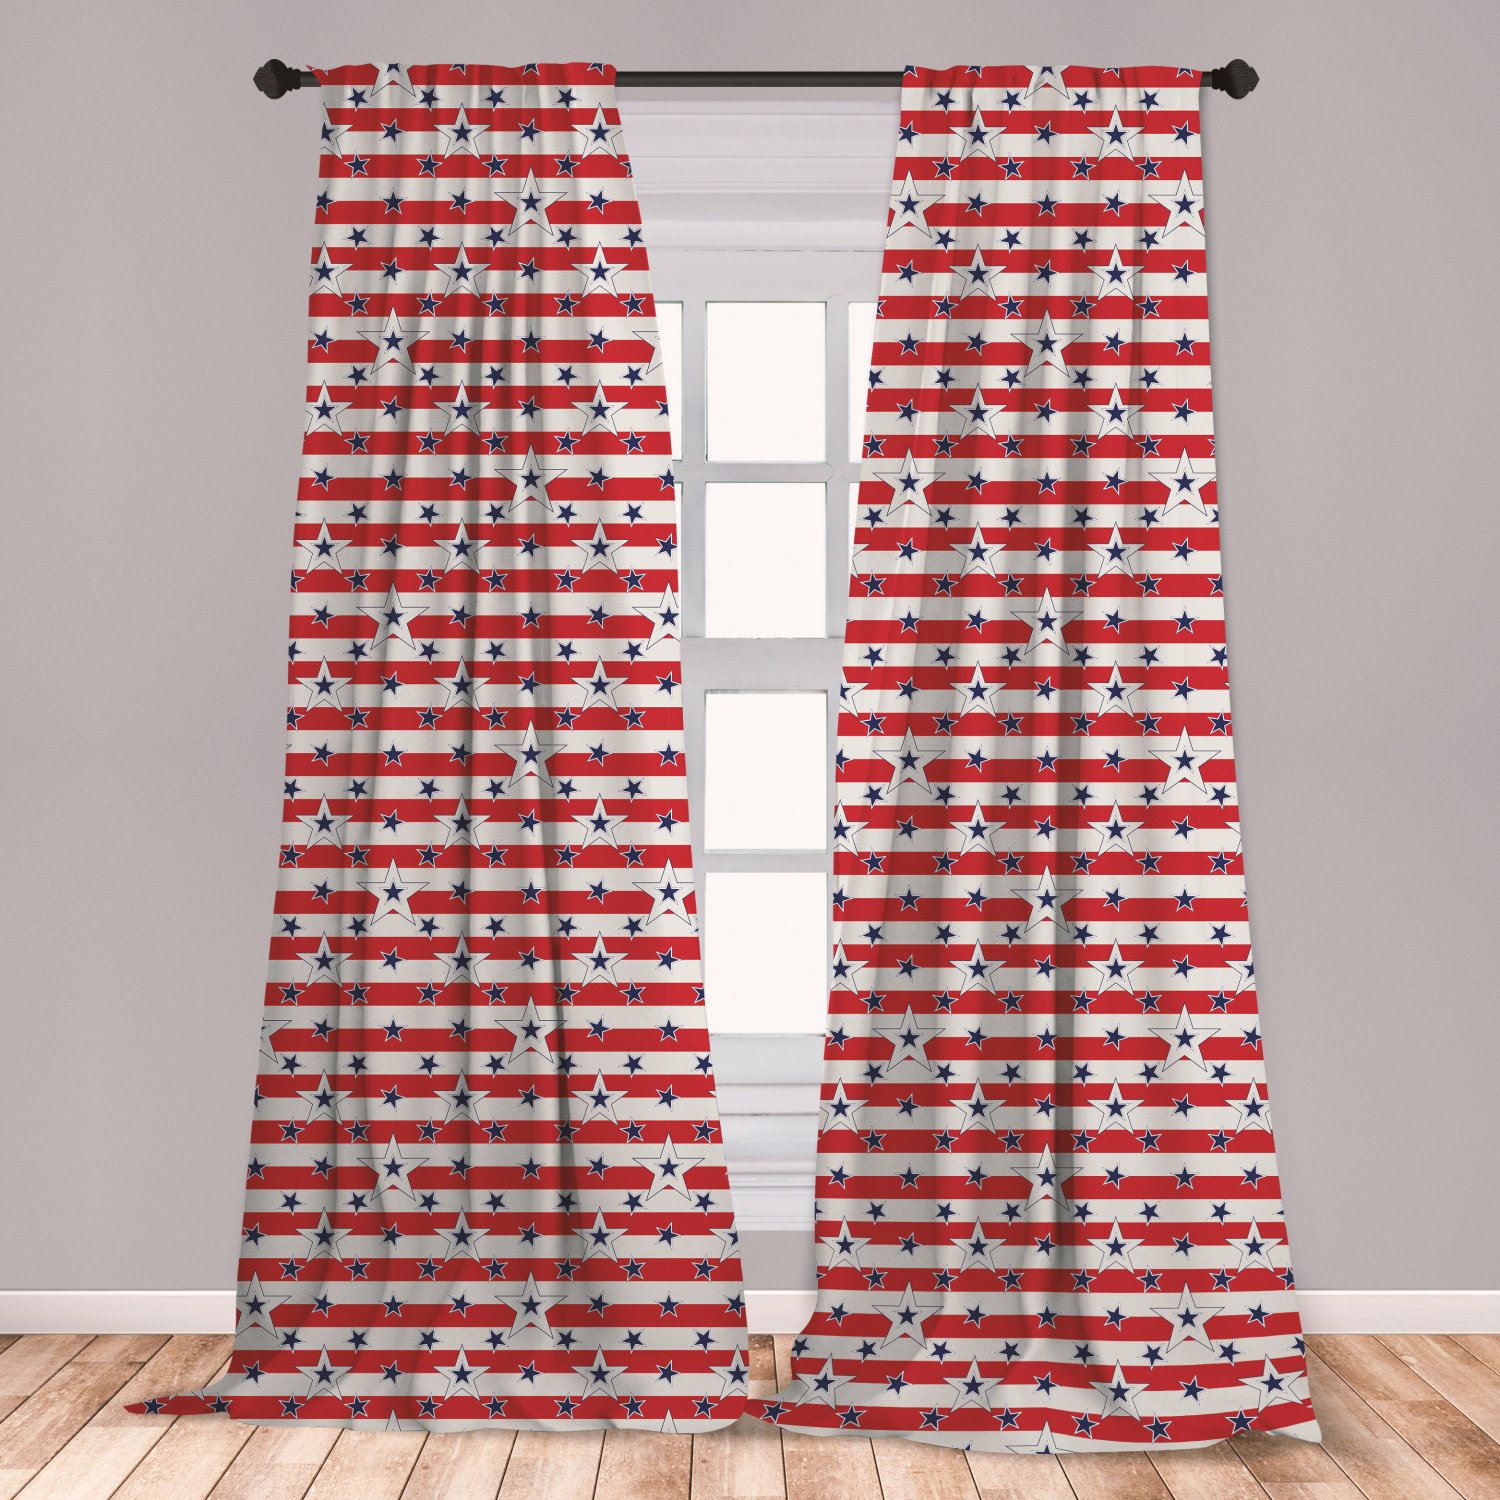 Lightweight Decorative Panels Set of 2 with Rod Pocket 56 x 84 Ambesonne 4th of July Window Curtains Blue White Stars and Stripes Pattern American Flag Inspired Patriotic Theme 